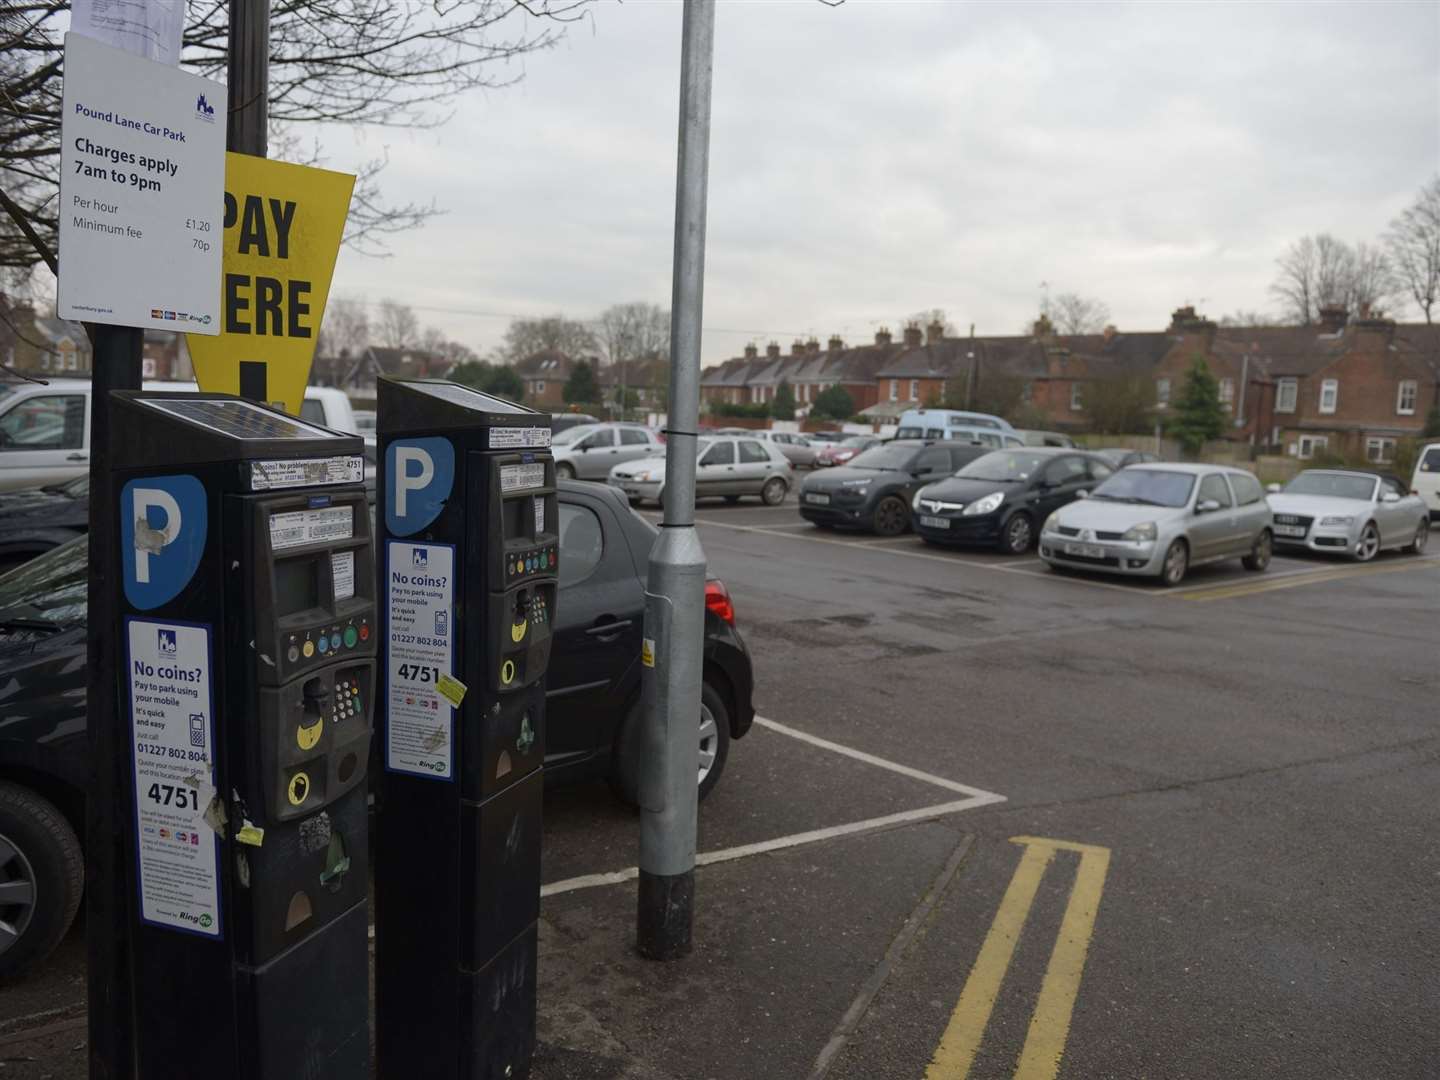 City centre parking in Canterbury is returning to pre-Covid levels but remains lower despite incomes continuing to rise. Picture: Barry Goodwin